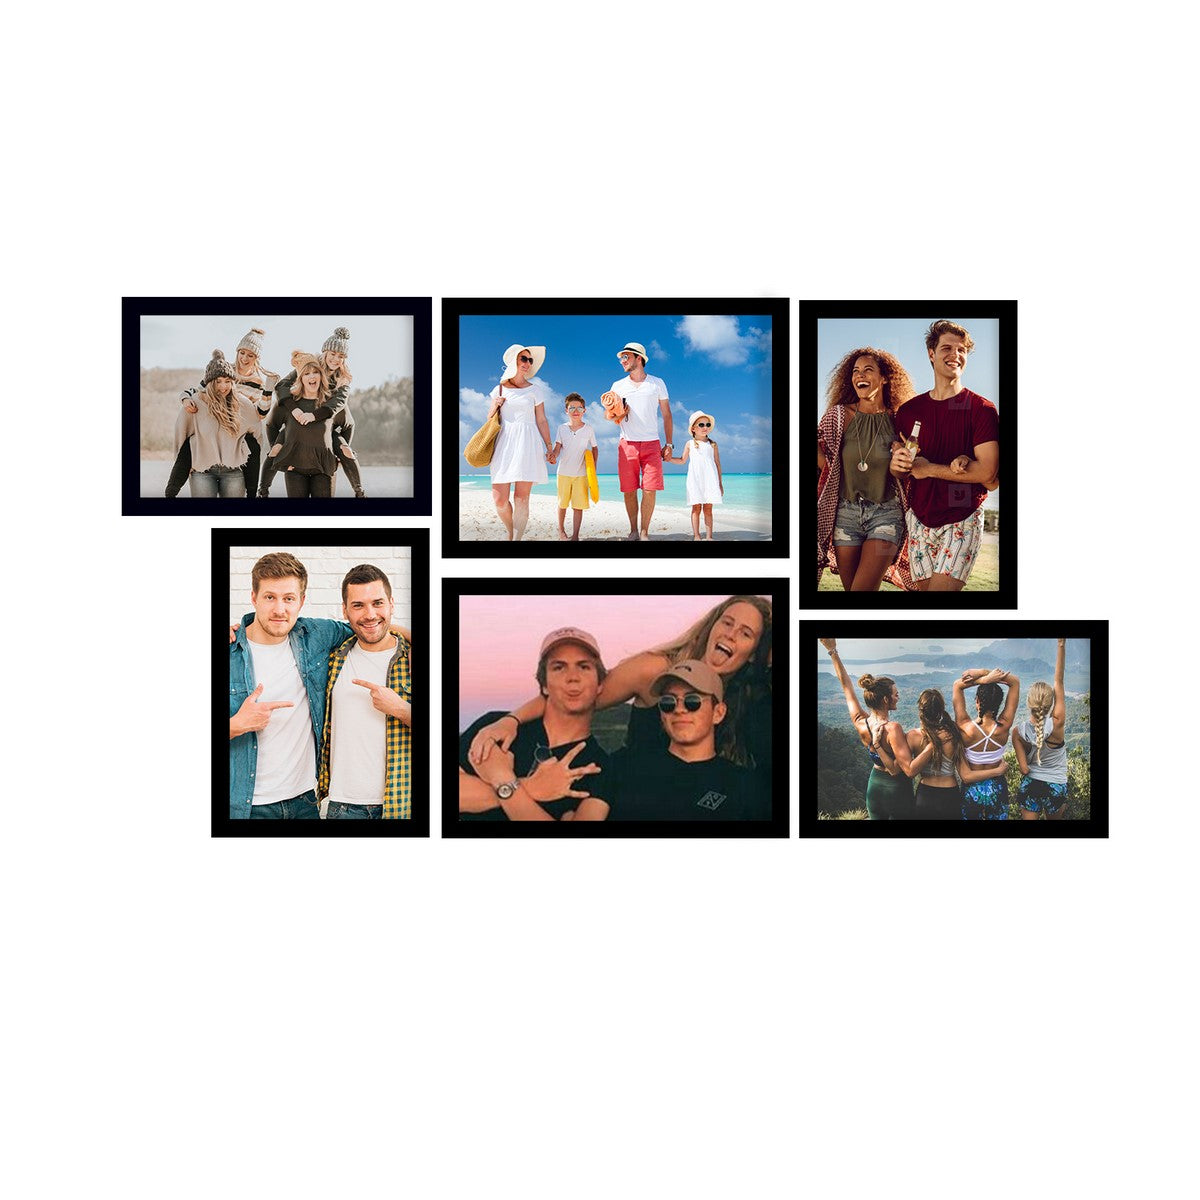 Memory Wall Collage Photo Frame - Set of 6 Photo Frames for 4 Photos of 5"x7", 2 Photos of 6"x8"